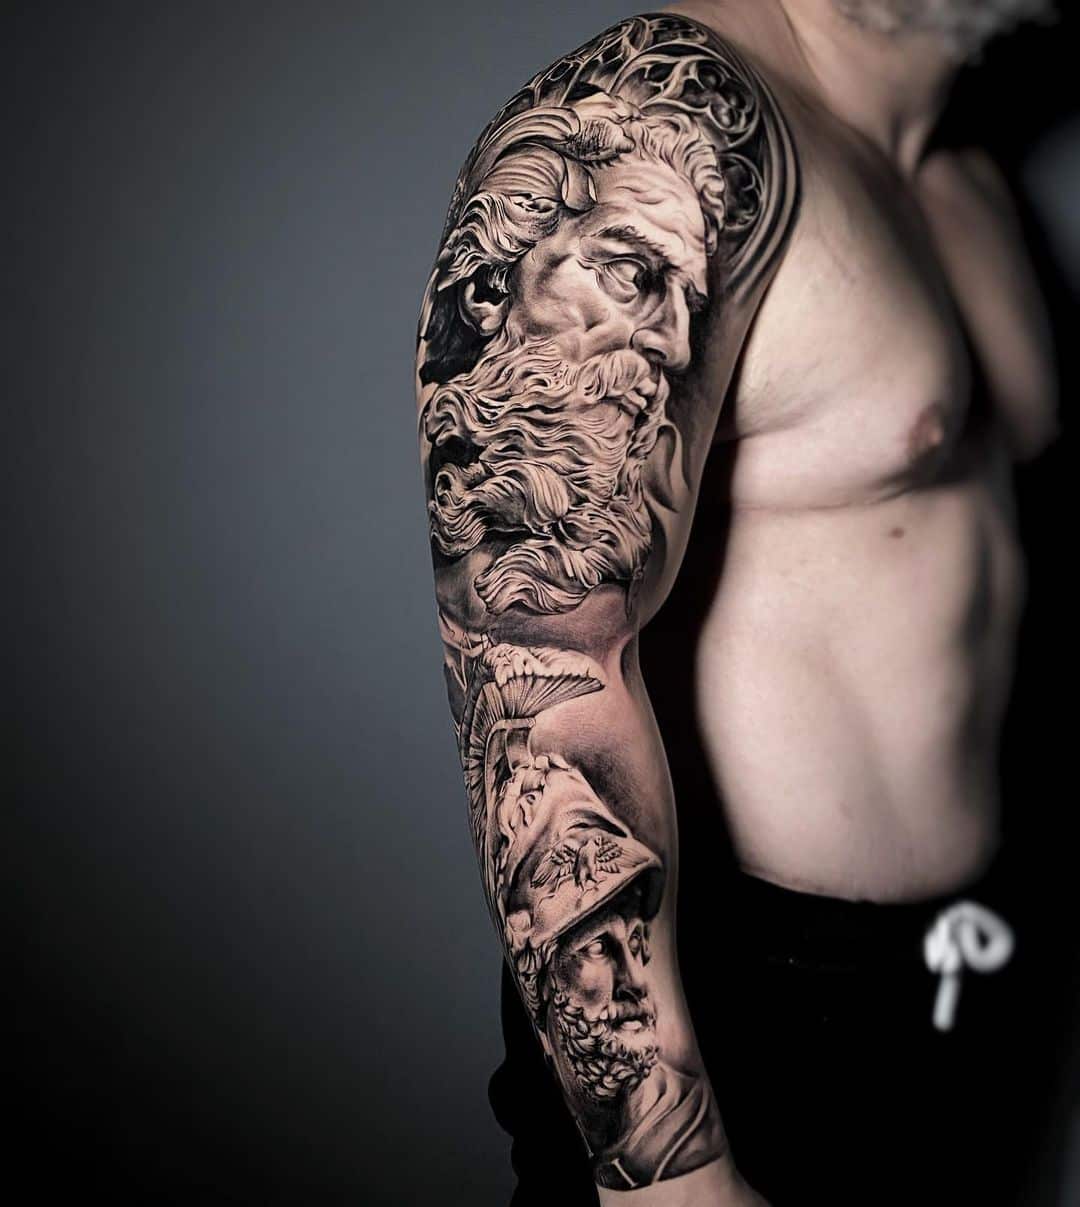 Ares Tattoo: The meaning and lots of examples in this guide!